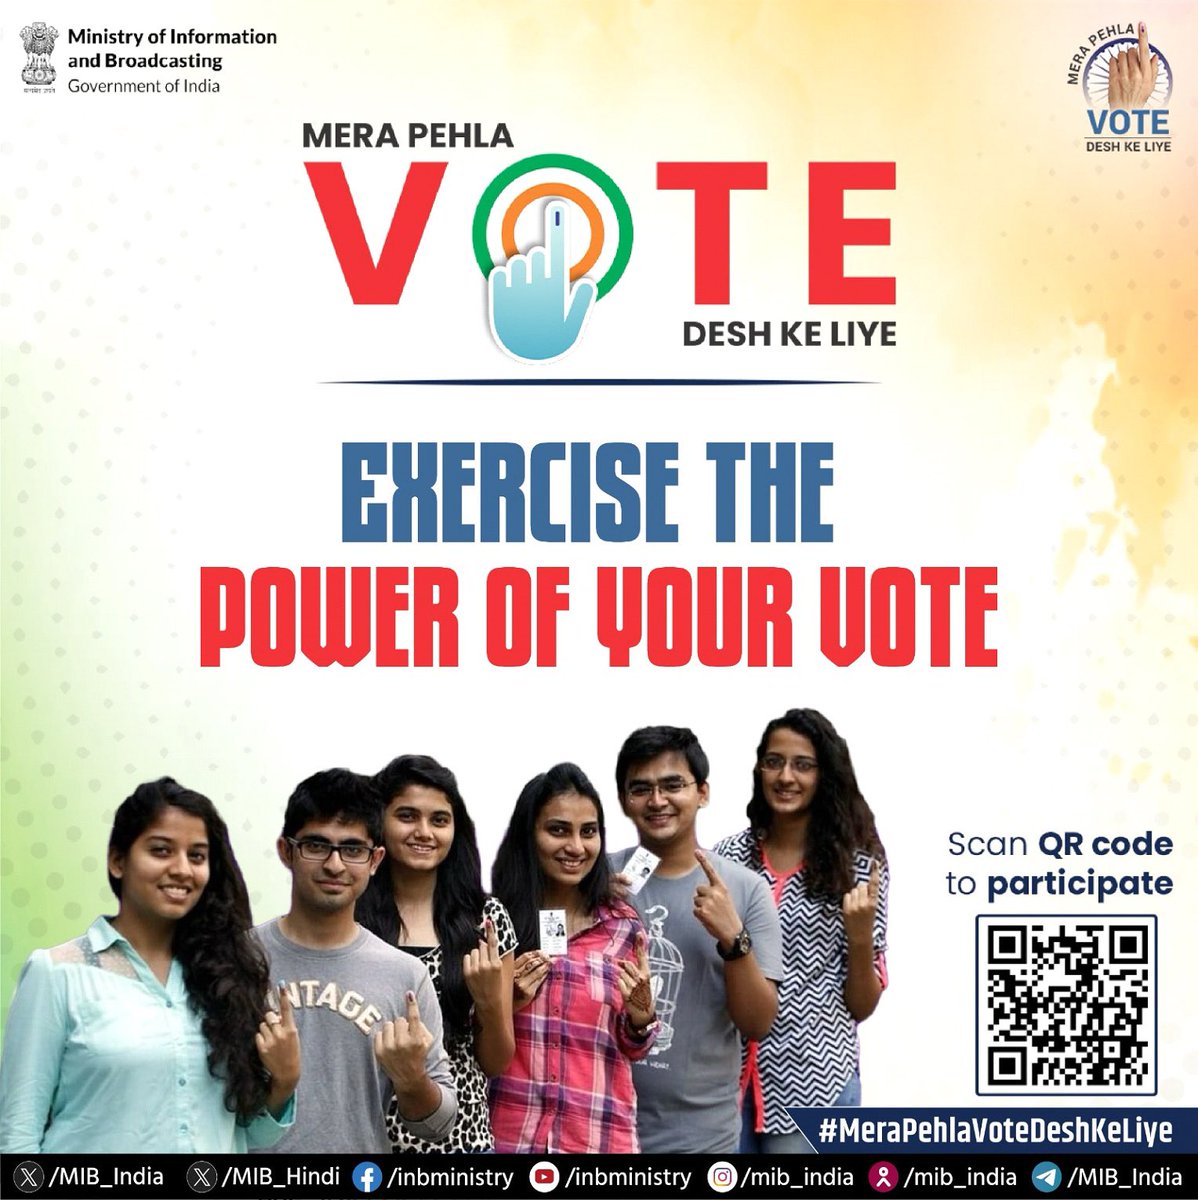 Exercise the power of your first vote Every vote counts in shaping our collective future. #MeraPehlaVoteDeshKeLiye